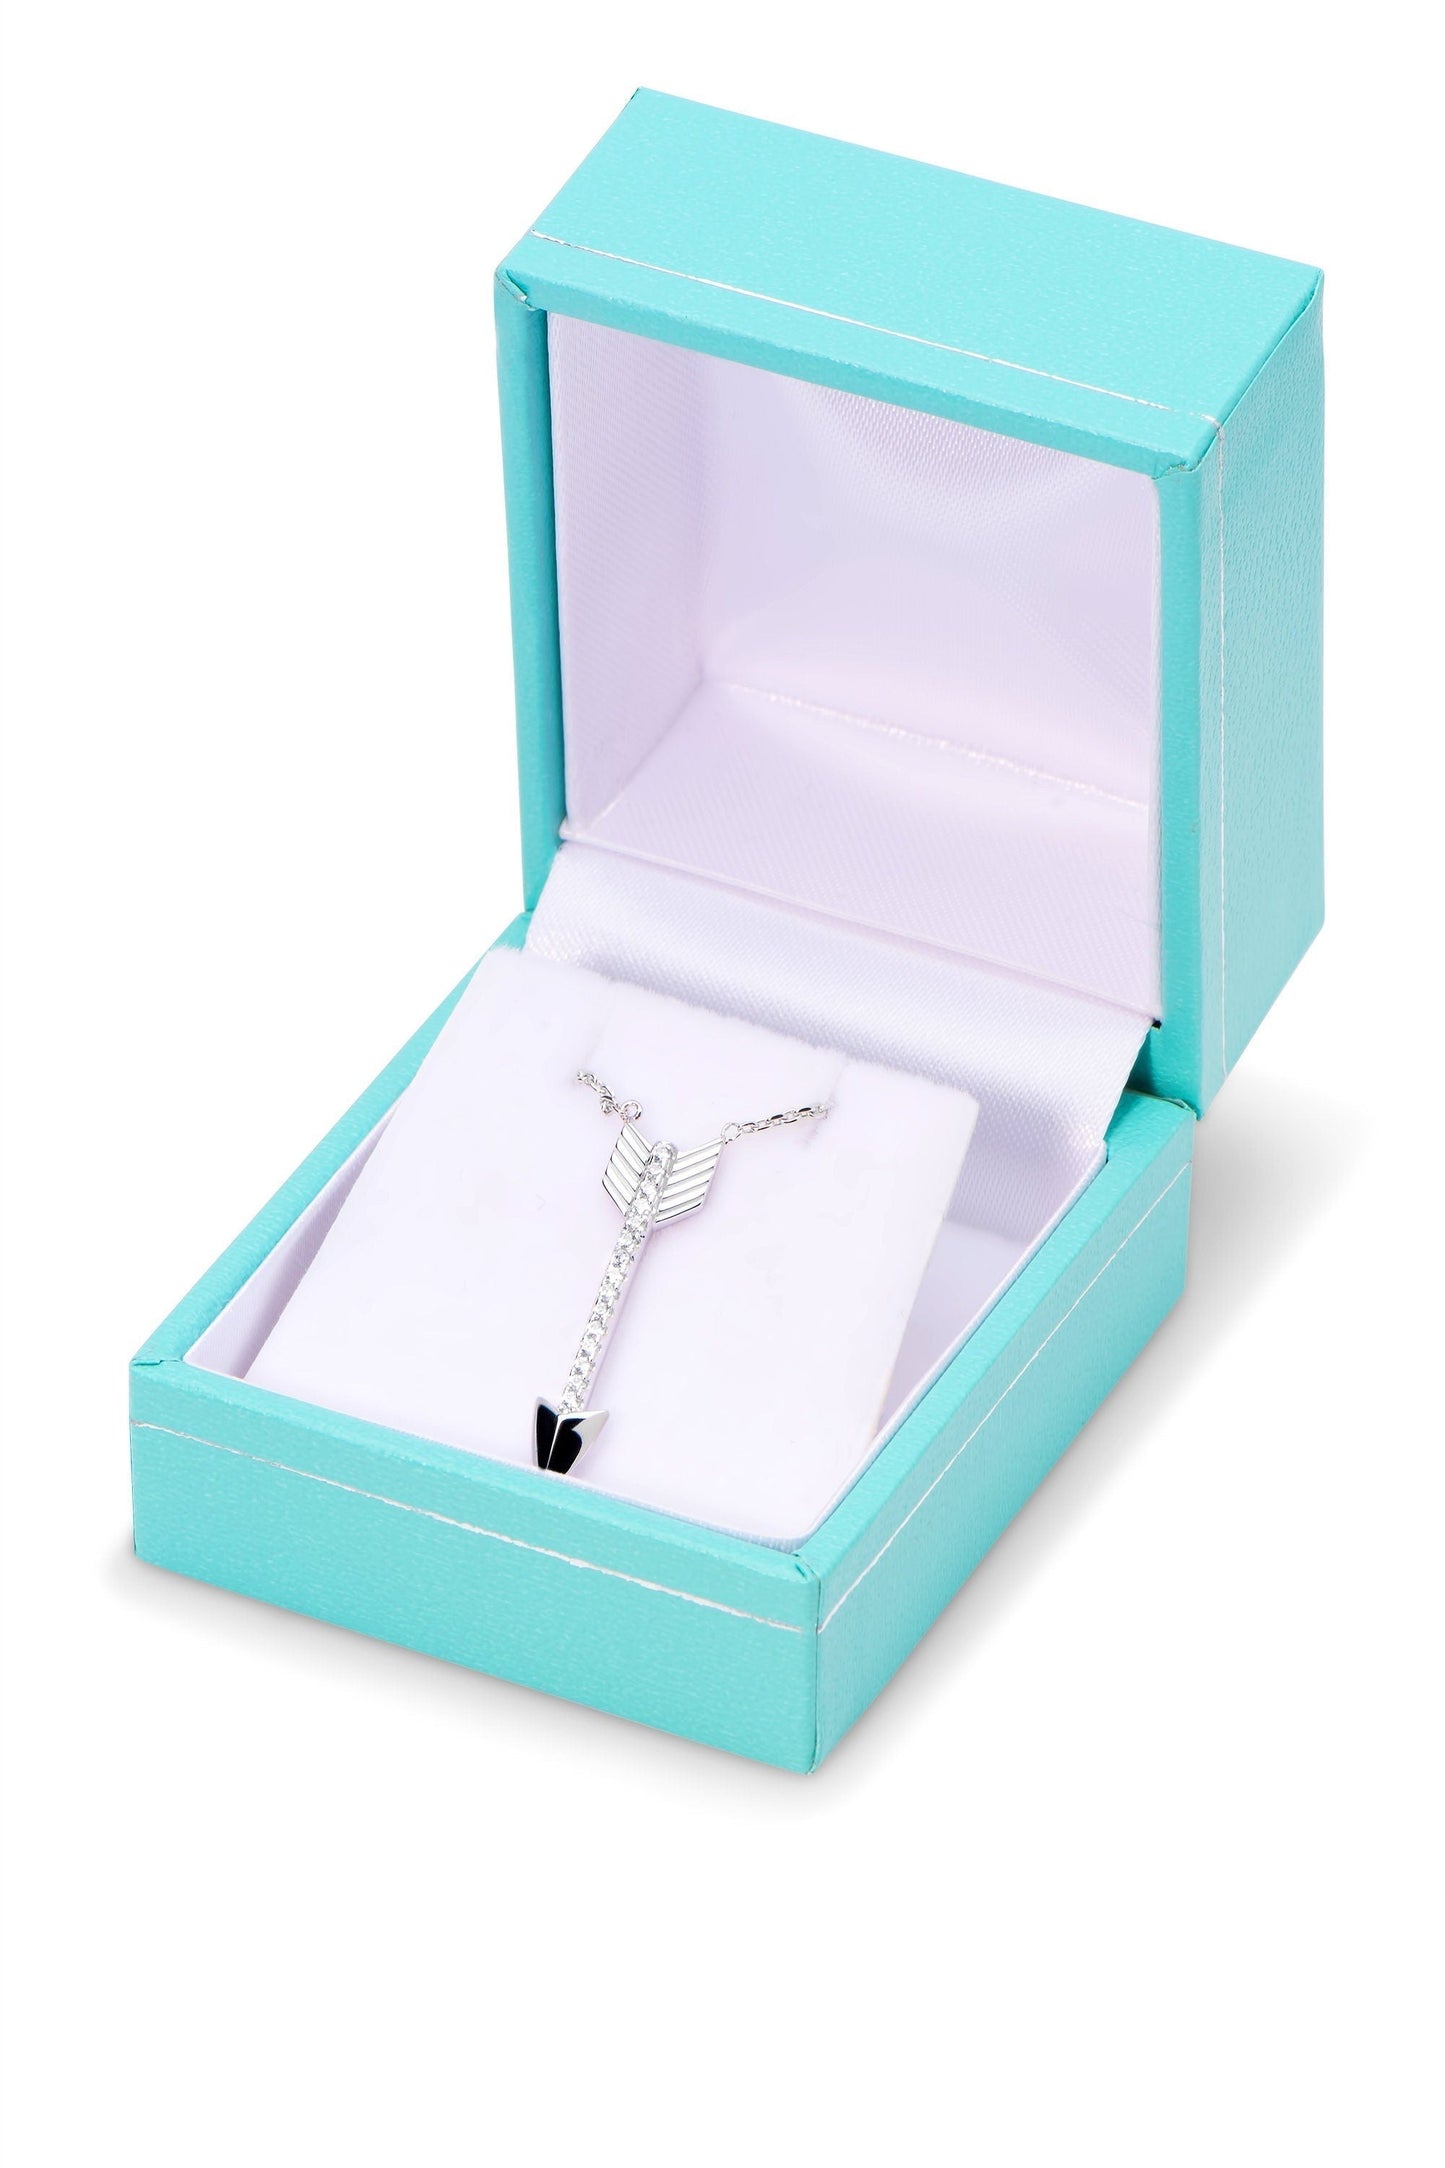 Sterling Silver Arrow Charm Necklace